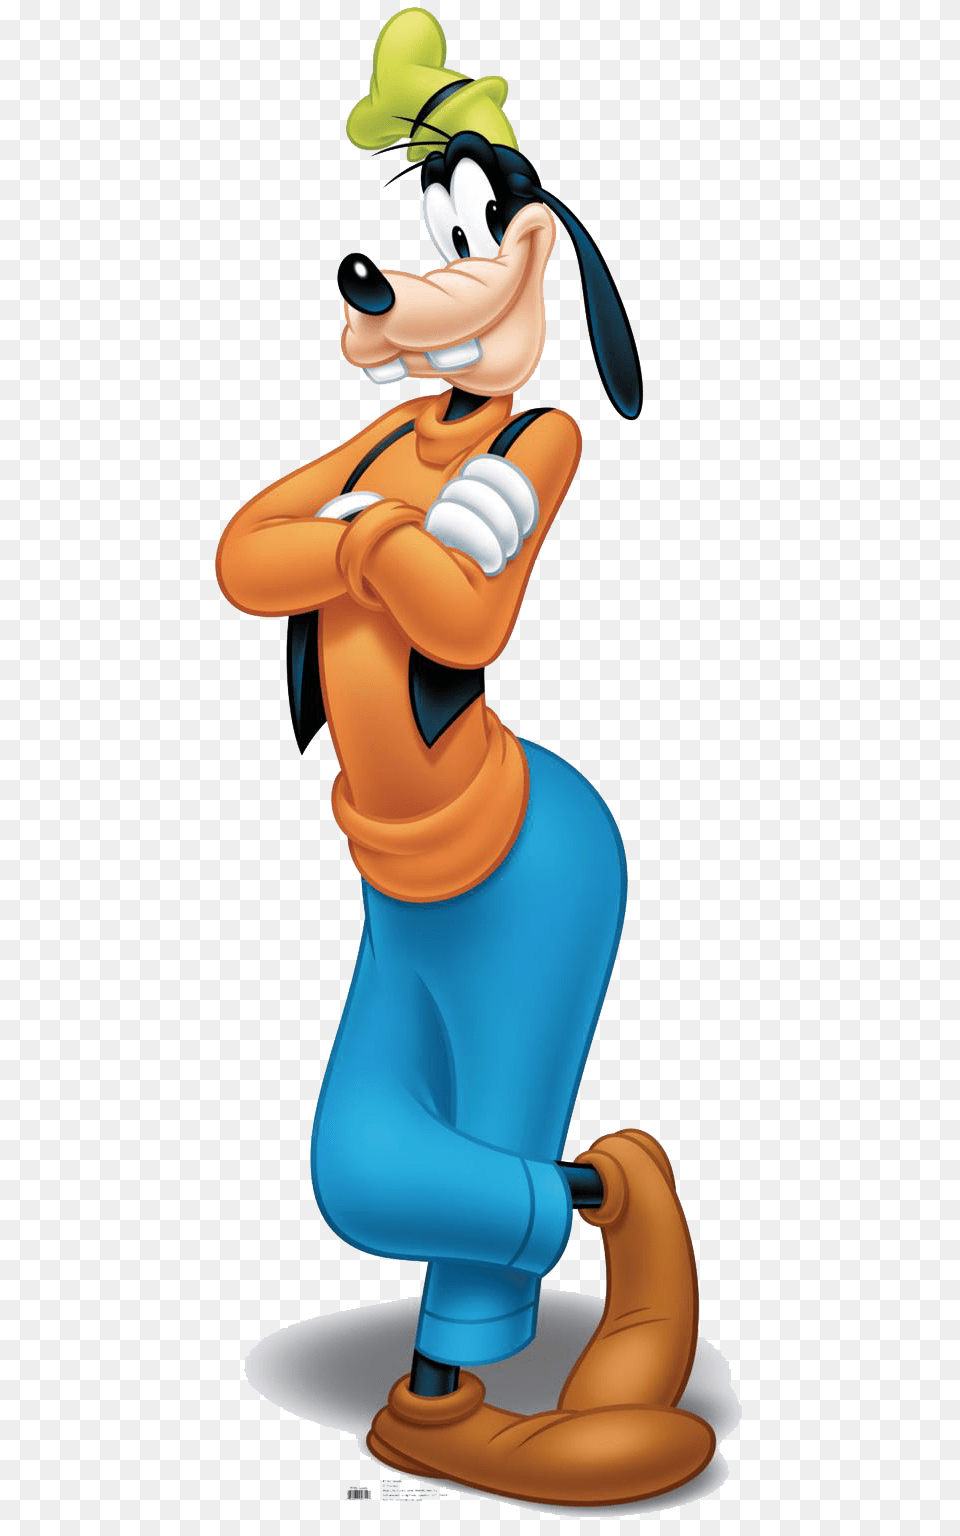 Goofy, Cartoon, Adult, Female, Person Png